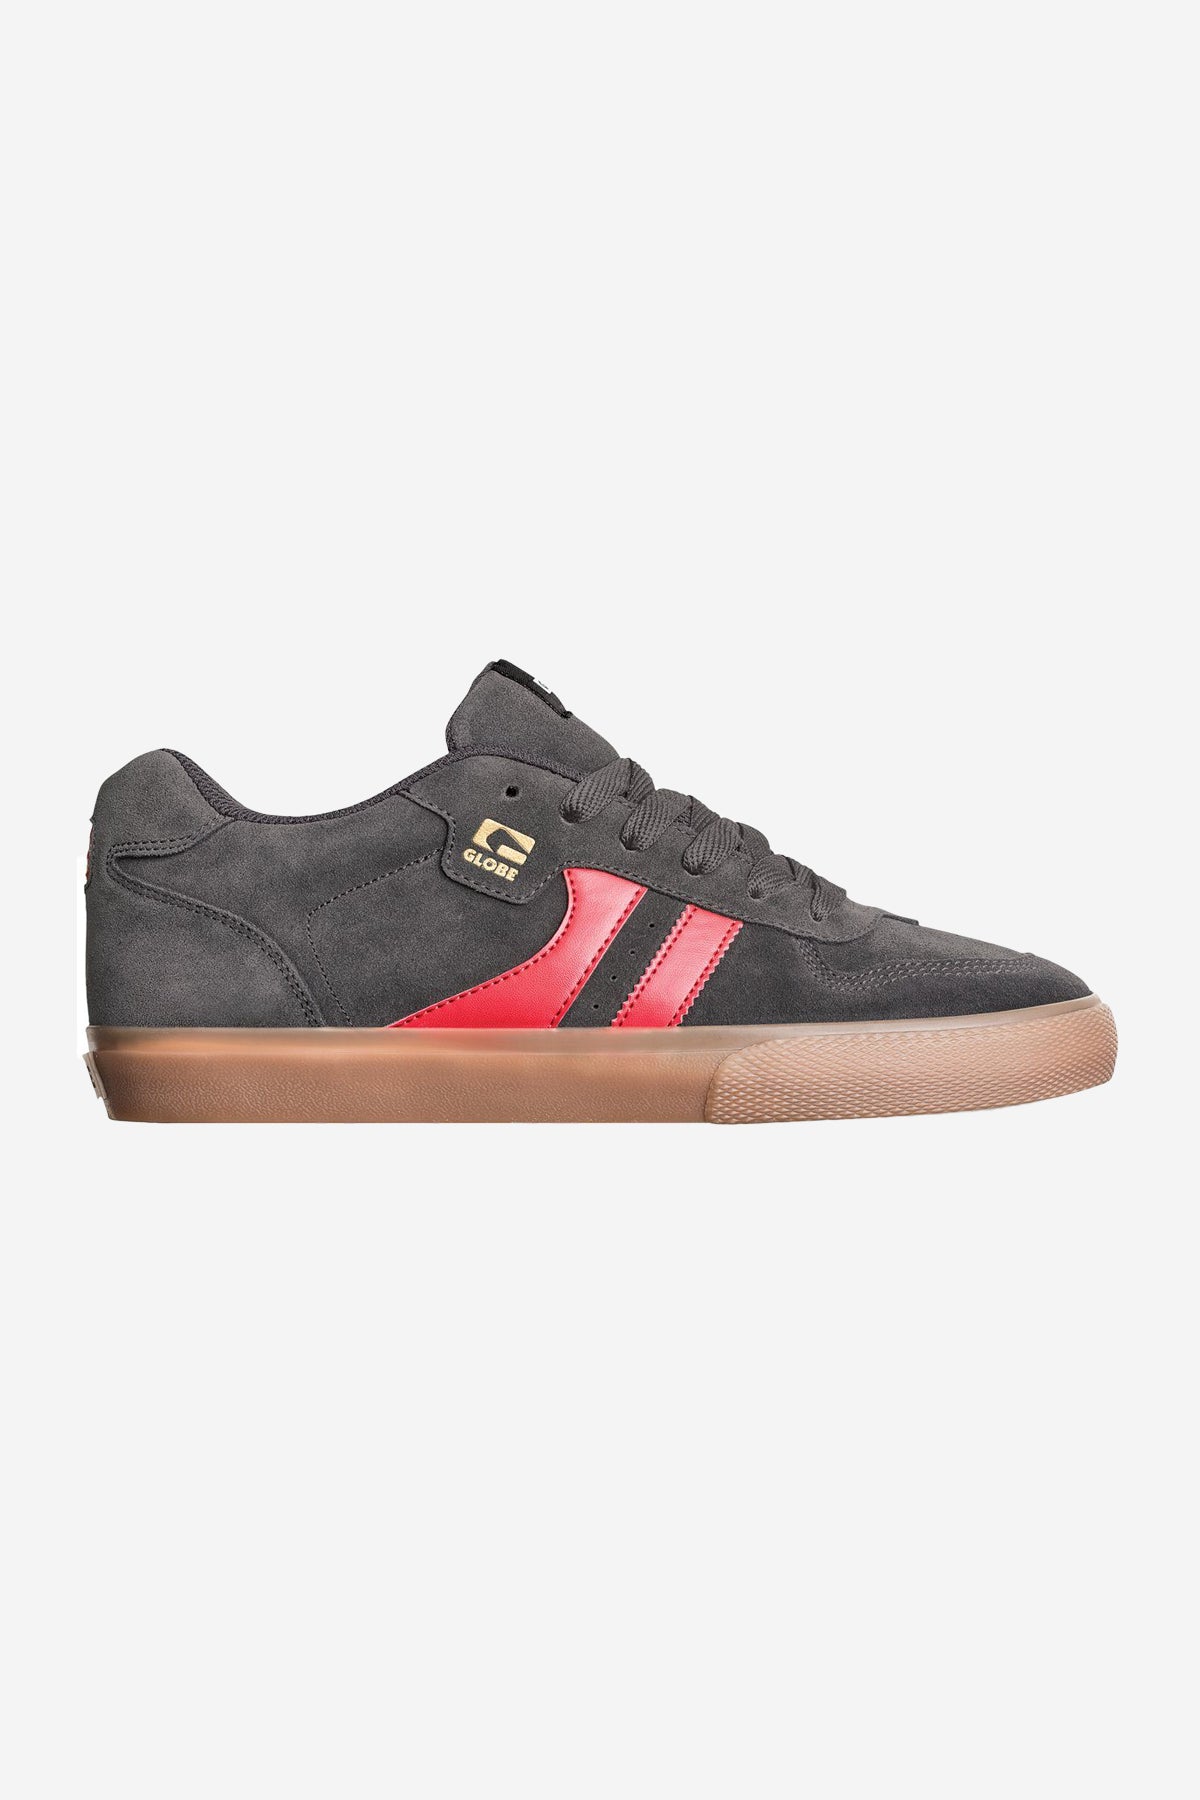 encore-2 charcoal gum red skateboard  shoes